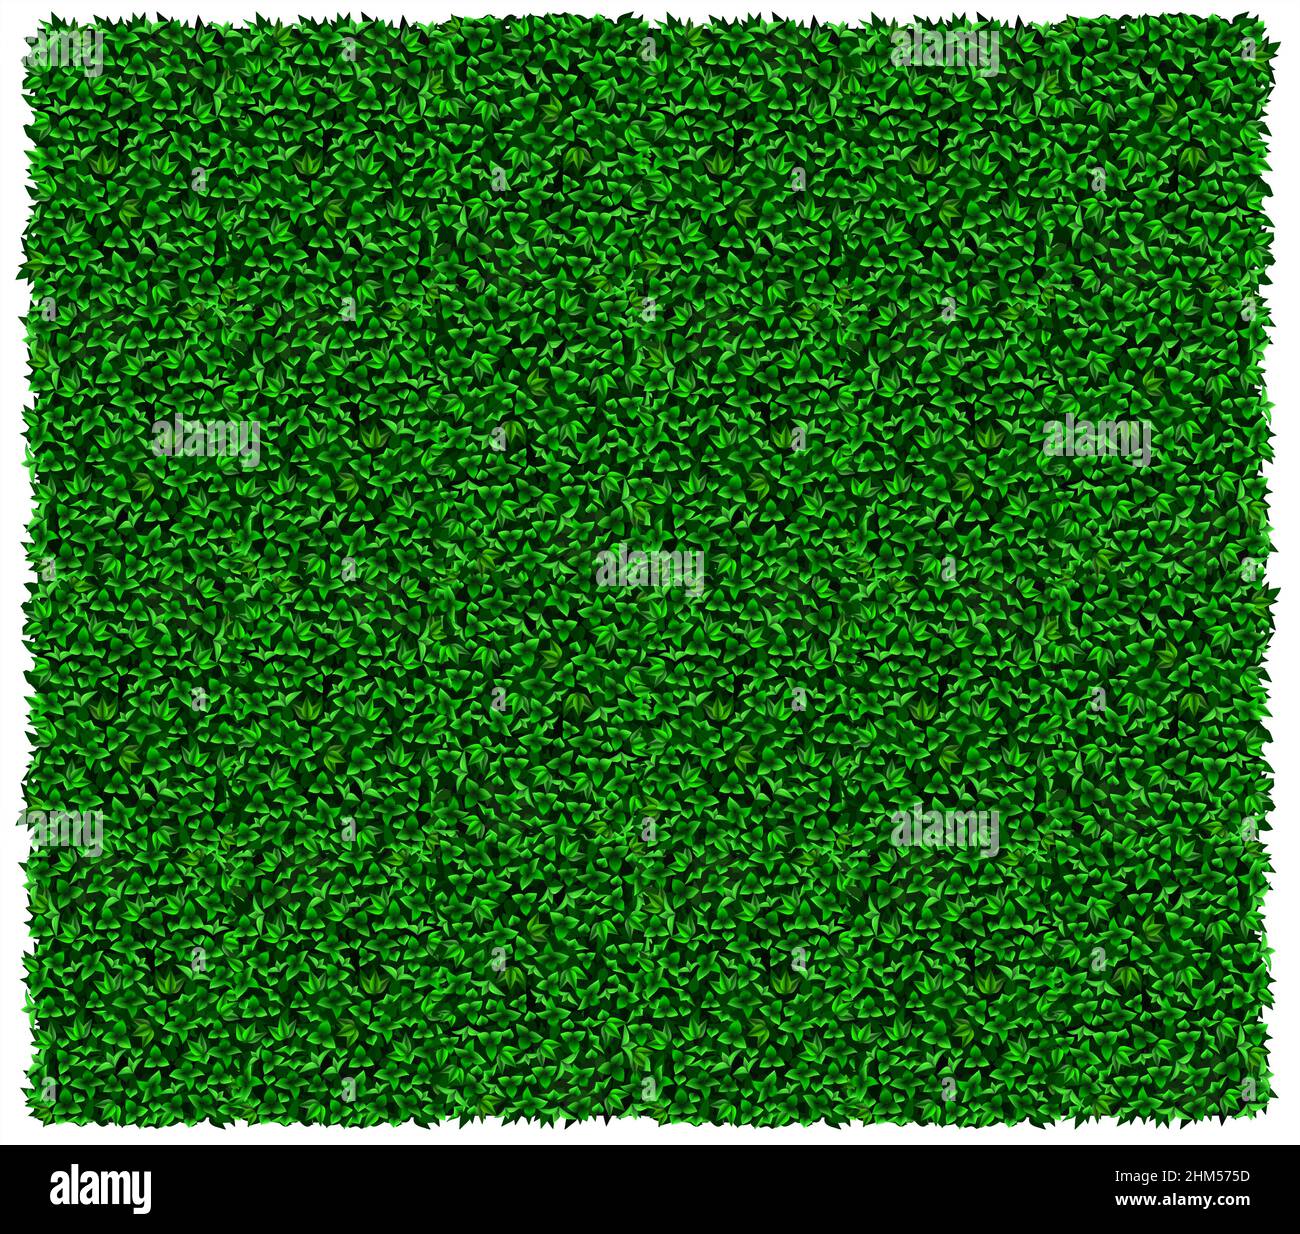 Texture of green wall of grapes or ivy. Vector graphics. Green leaves Stock Vector